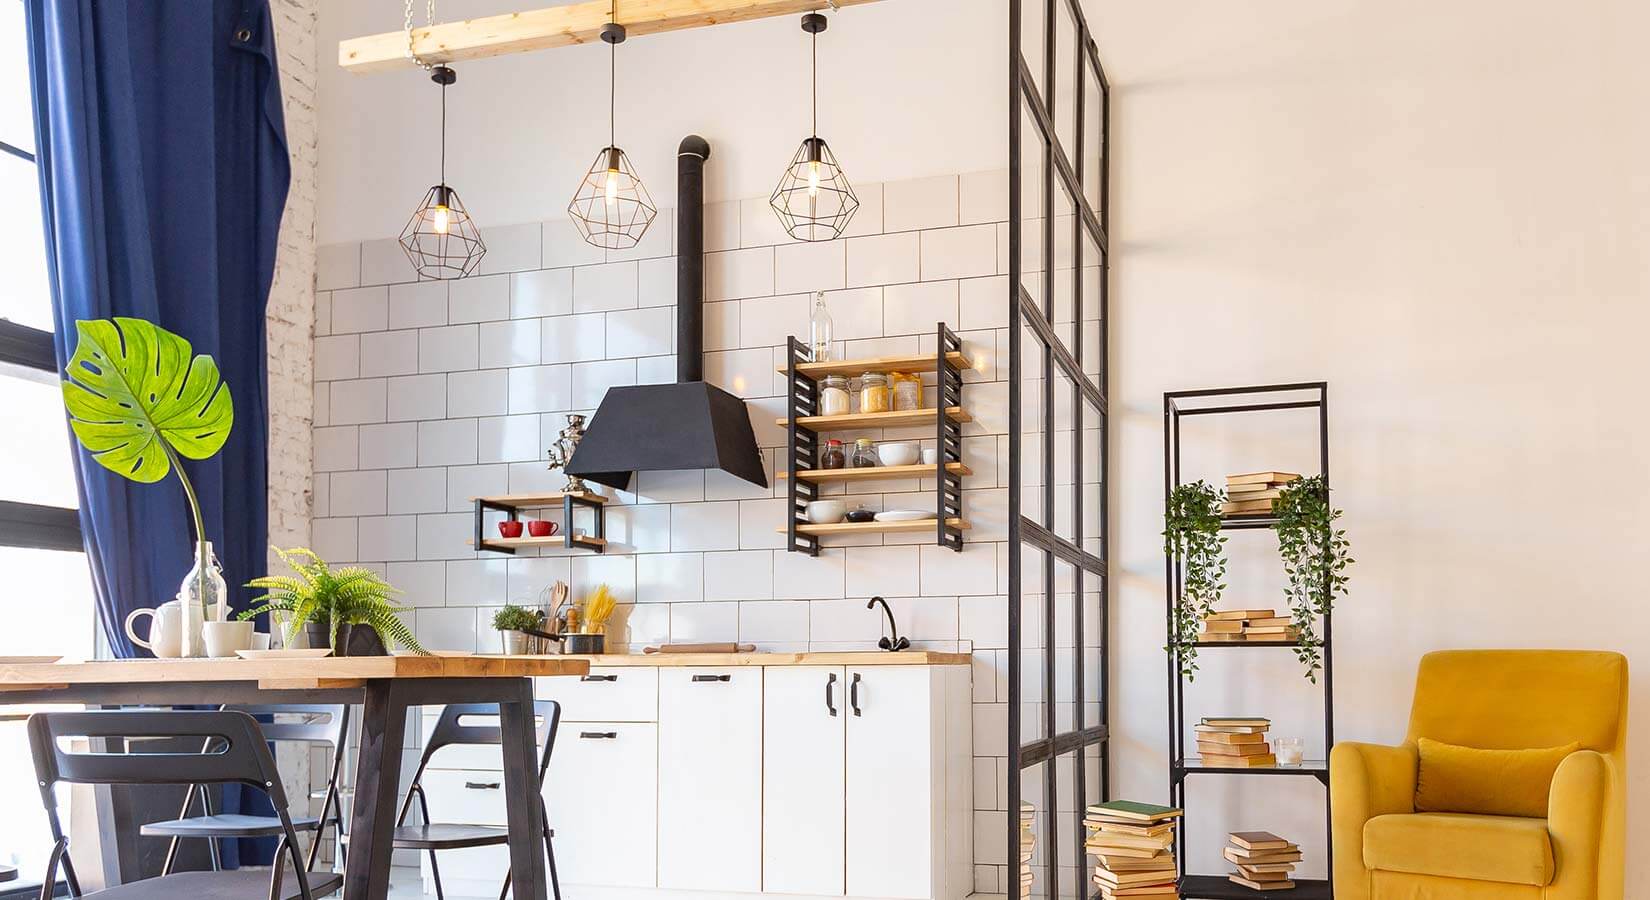 Small one-wall kitchen with white cabinets, wood countertops, and cage pendant lights suspended from wood beam.